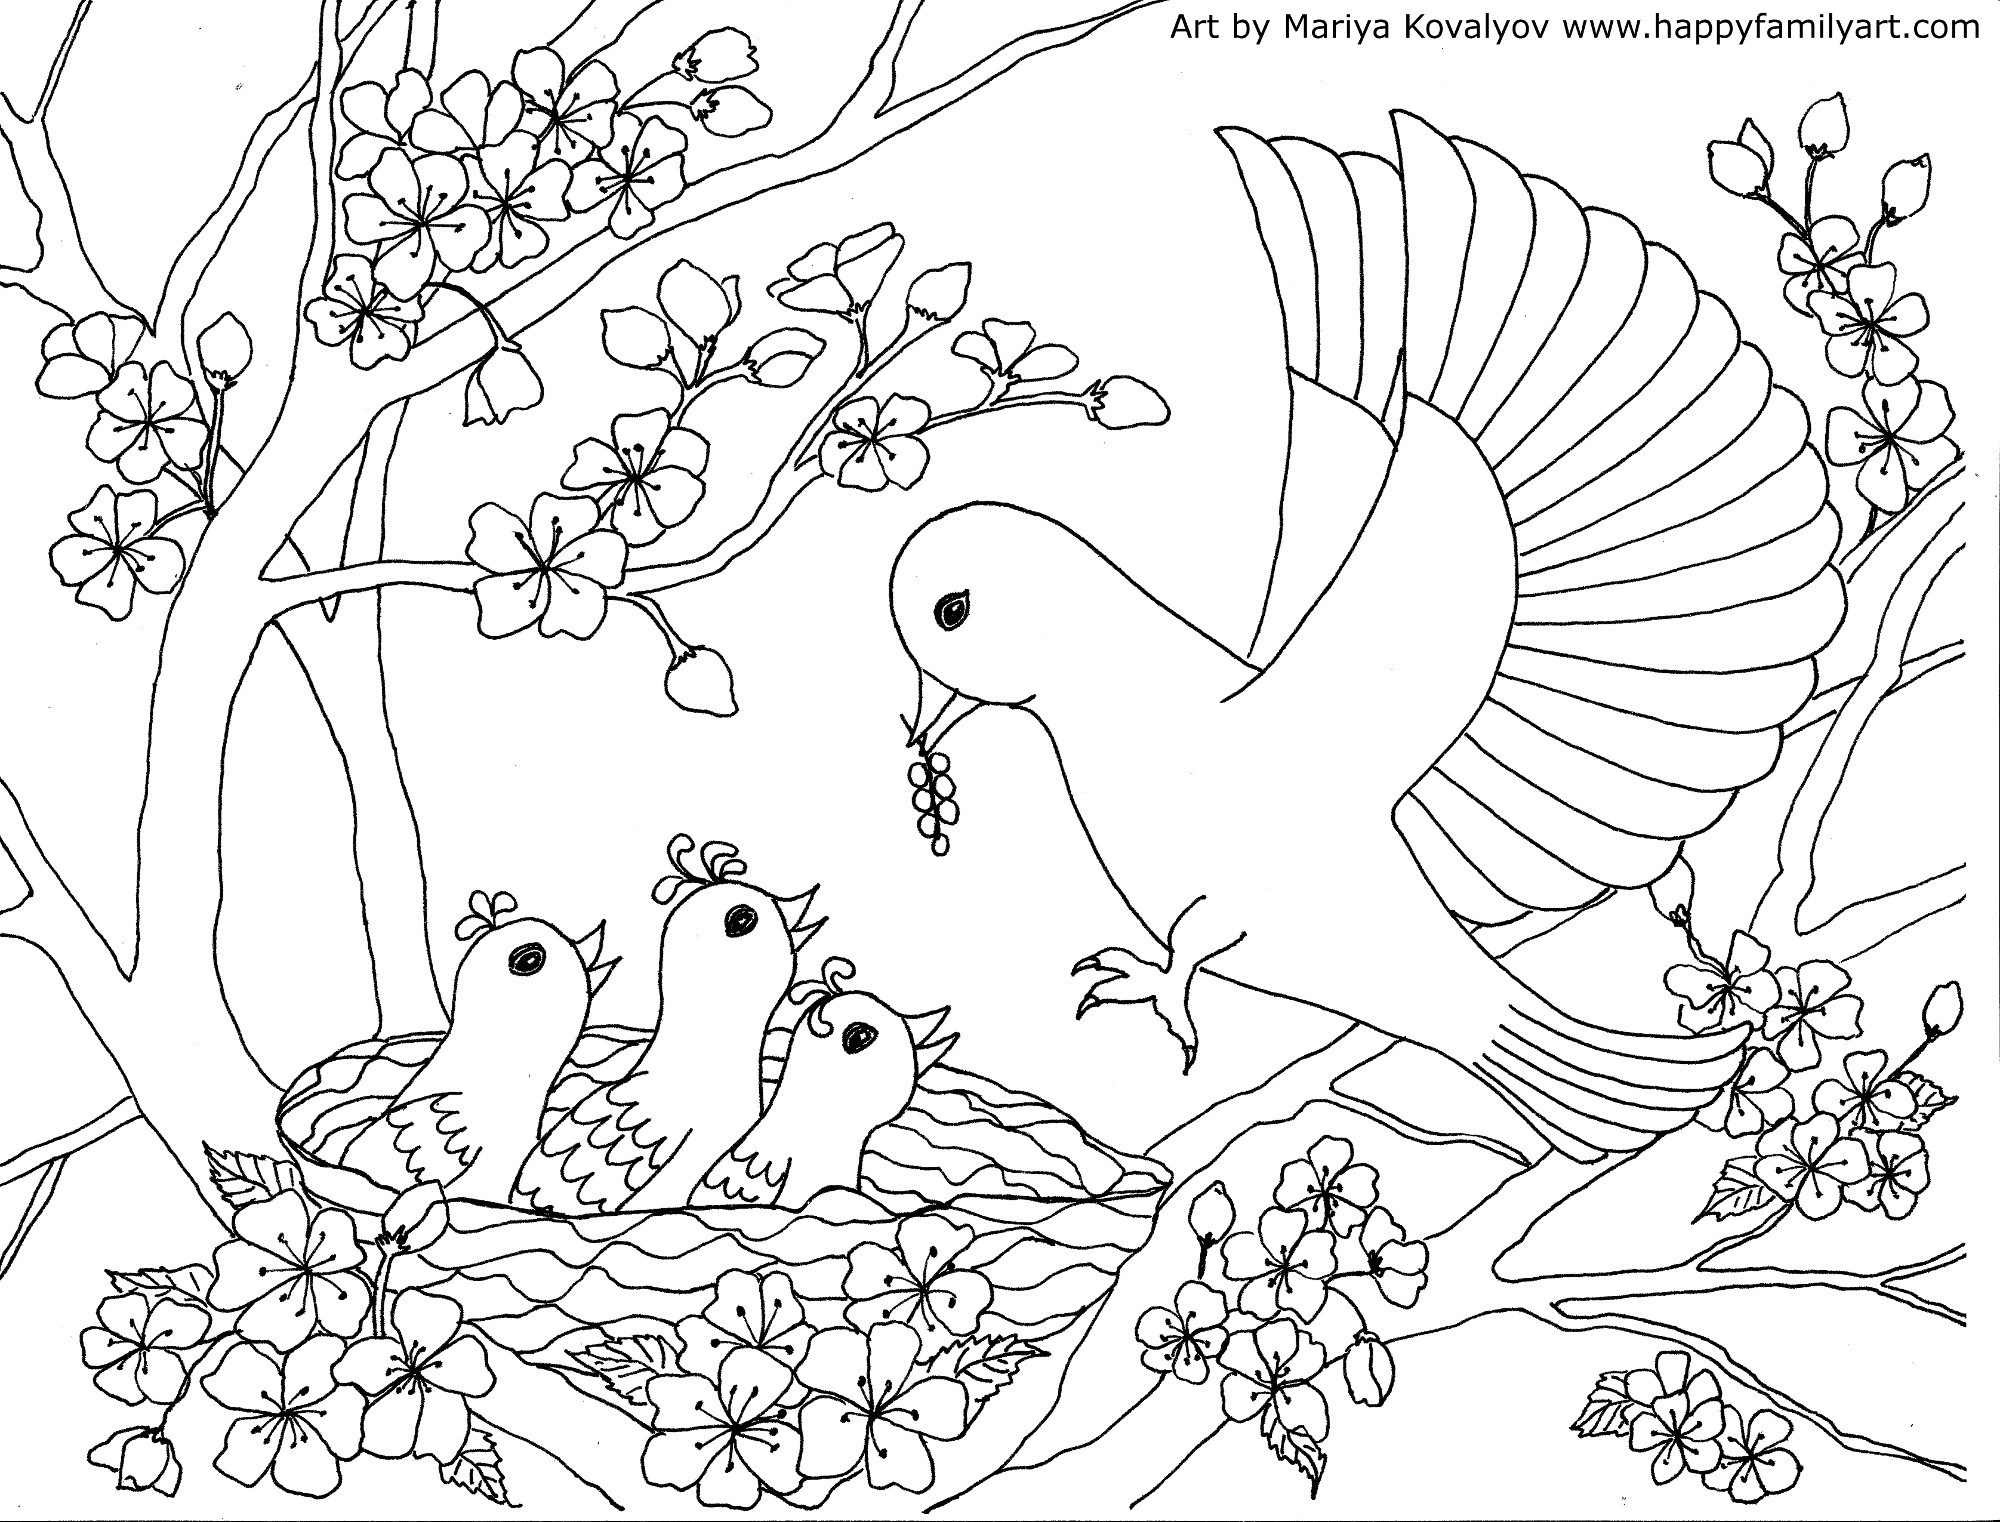 Baby Bird Coloring Page
 Happy Family Art original and fun coloring pages